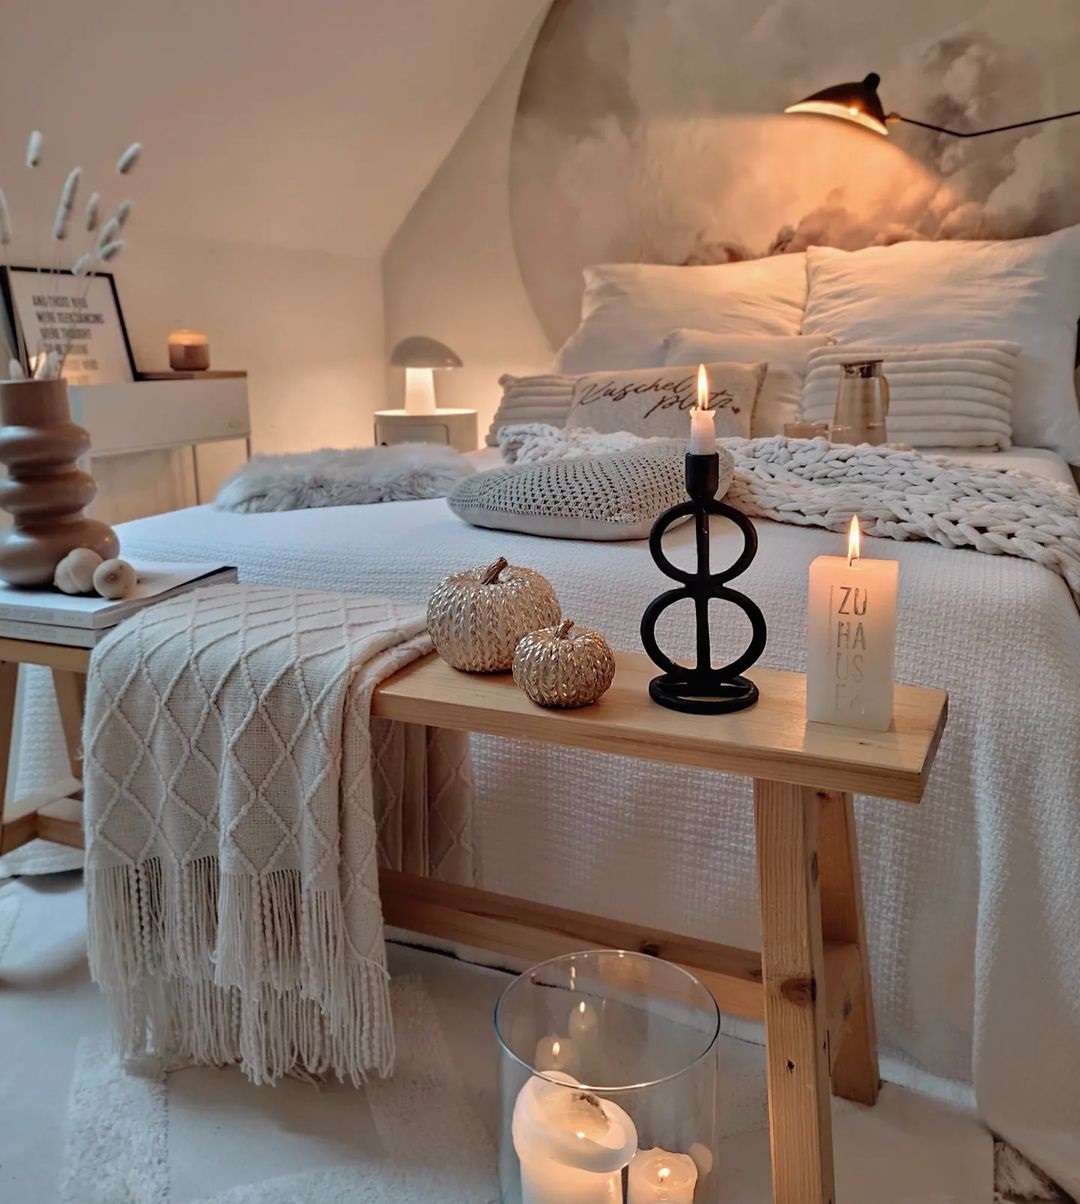 A cozy bedroom with fall decor